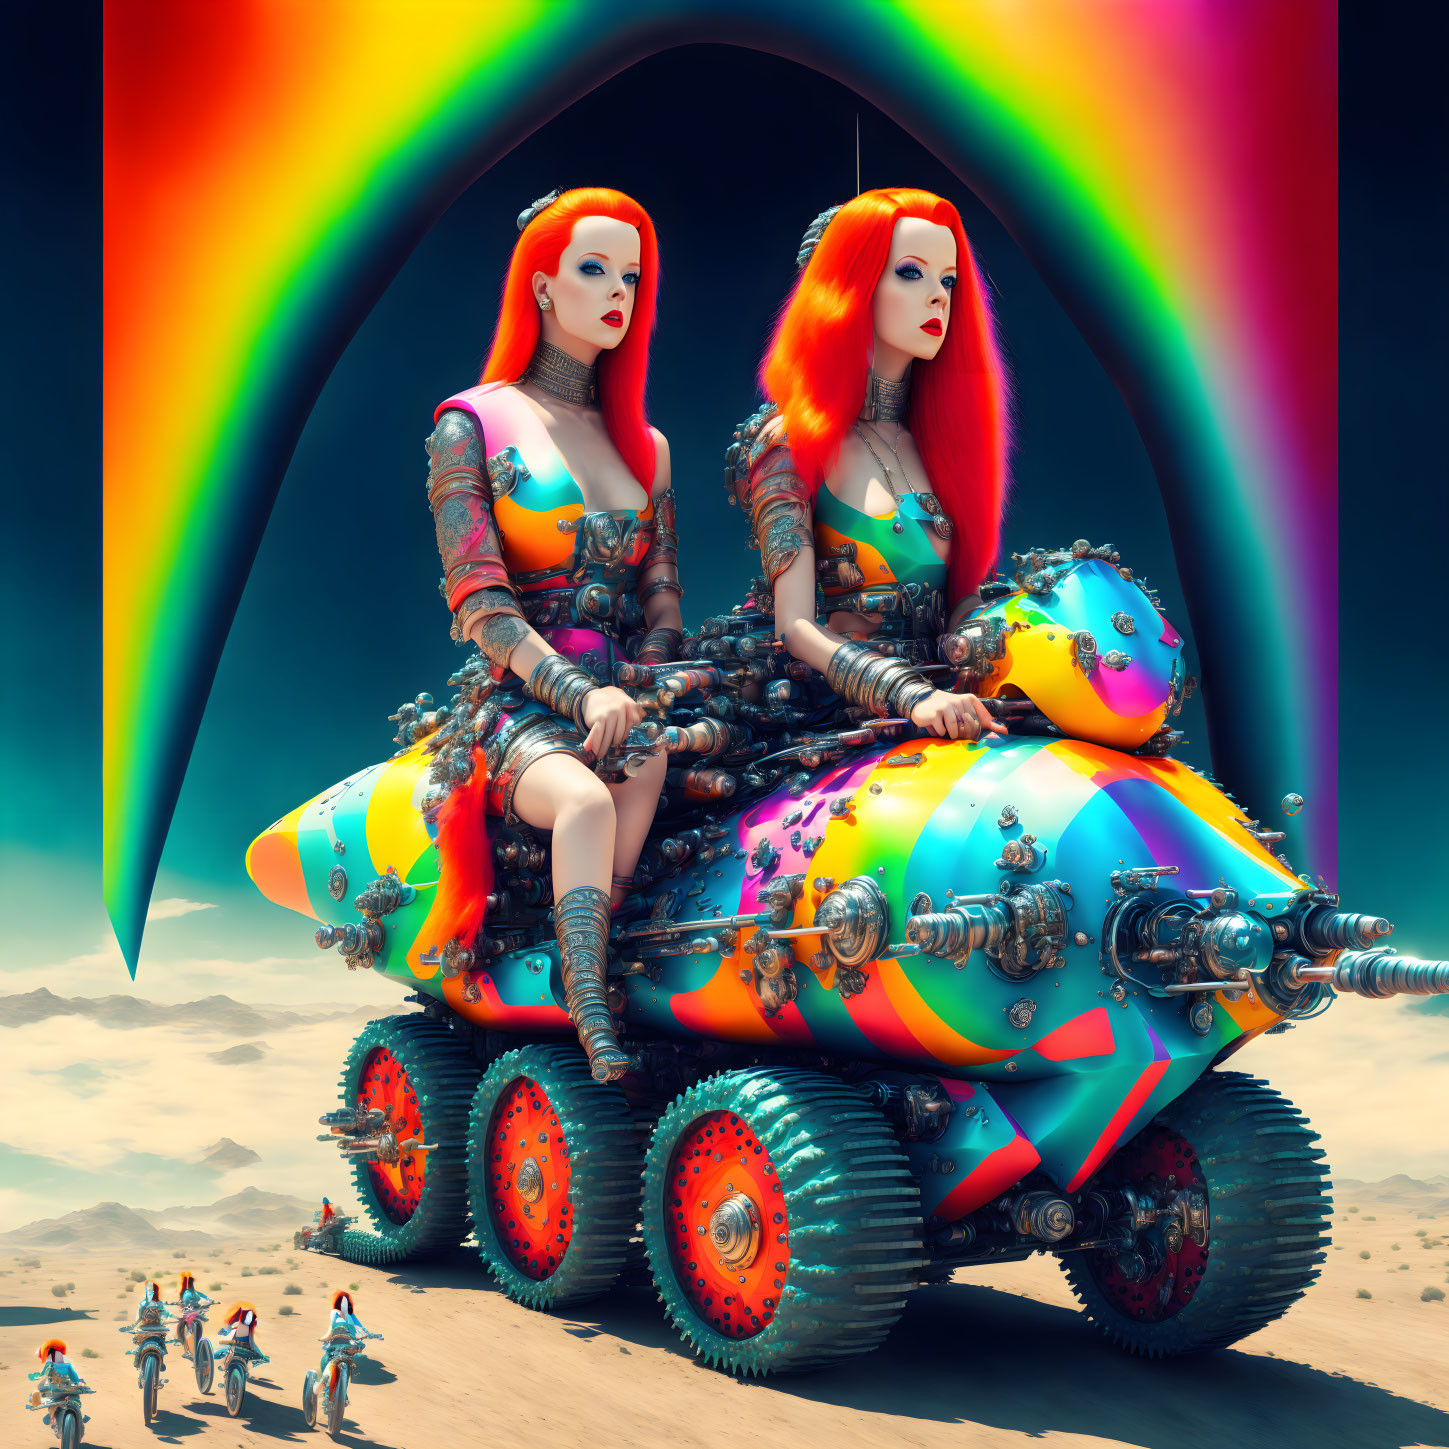 Red-haired figures in futuristic outfits ride rainbow vehicle in desert landscape